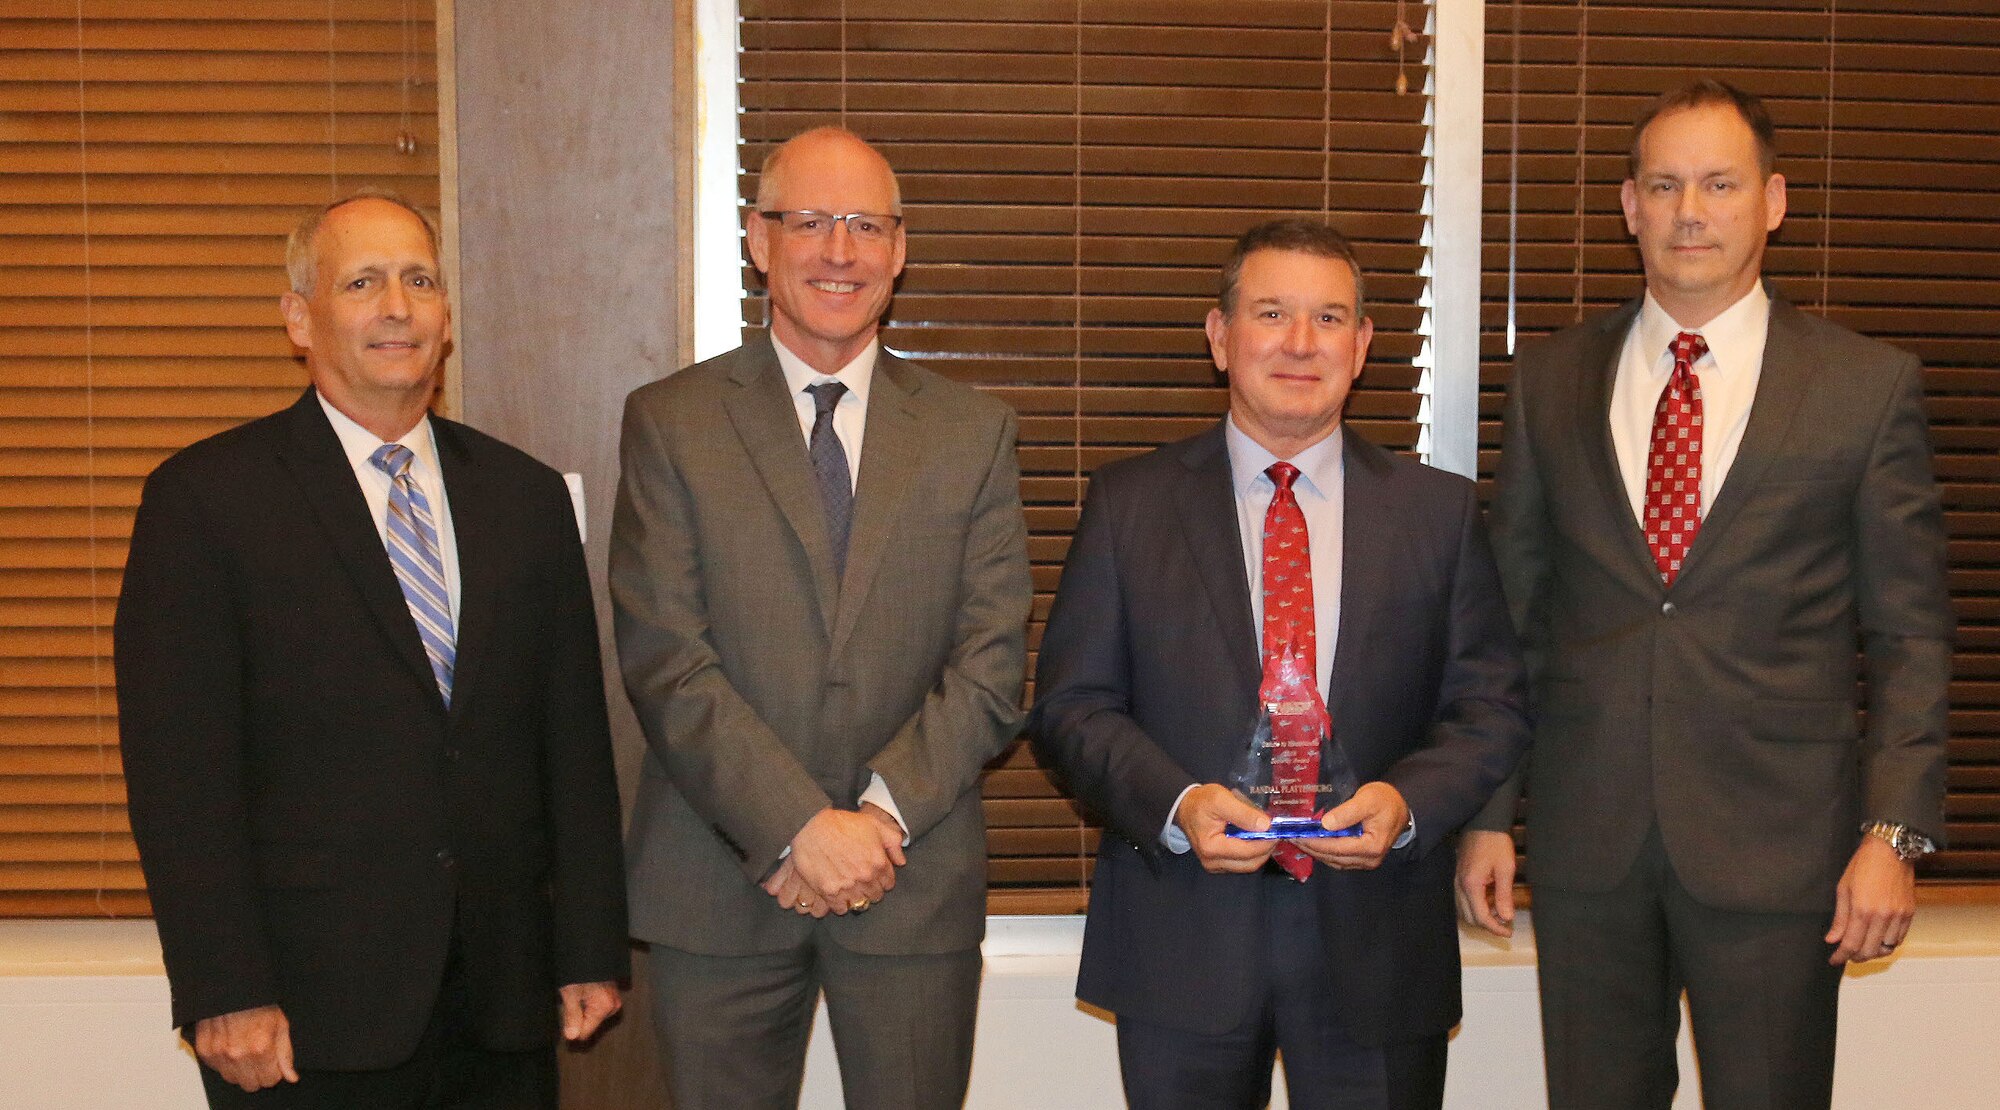 Propulsion Wind Tunnel Test Cell Supervisor Randal Plattenburg (third from left) receives the Security Award during the National Aerospace Solutions, LLC Salute to Excellence Annual Award Ceremony Nov. 14, 2018, at the Arnold Lakeside Center, Arnold Air Force Base, Tenn. Also pictured from left is NAS Deputy General Manager Michael Belzil, NAS General Manager Richard Tighe and NAS Business Services Director Chris Baker. (U.S. Air Force photo by Bradley Hicks)